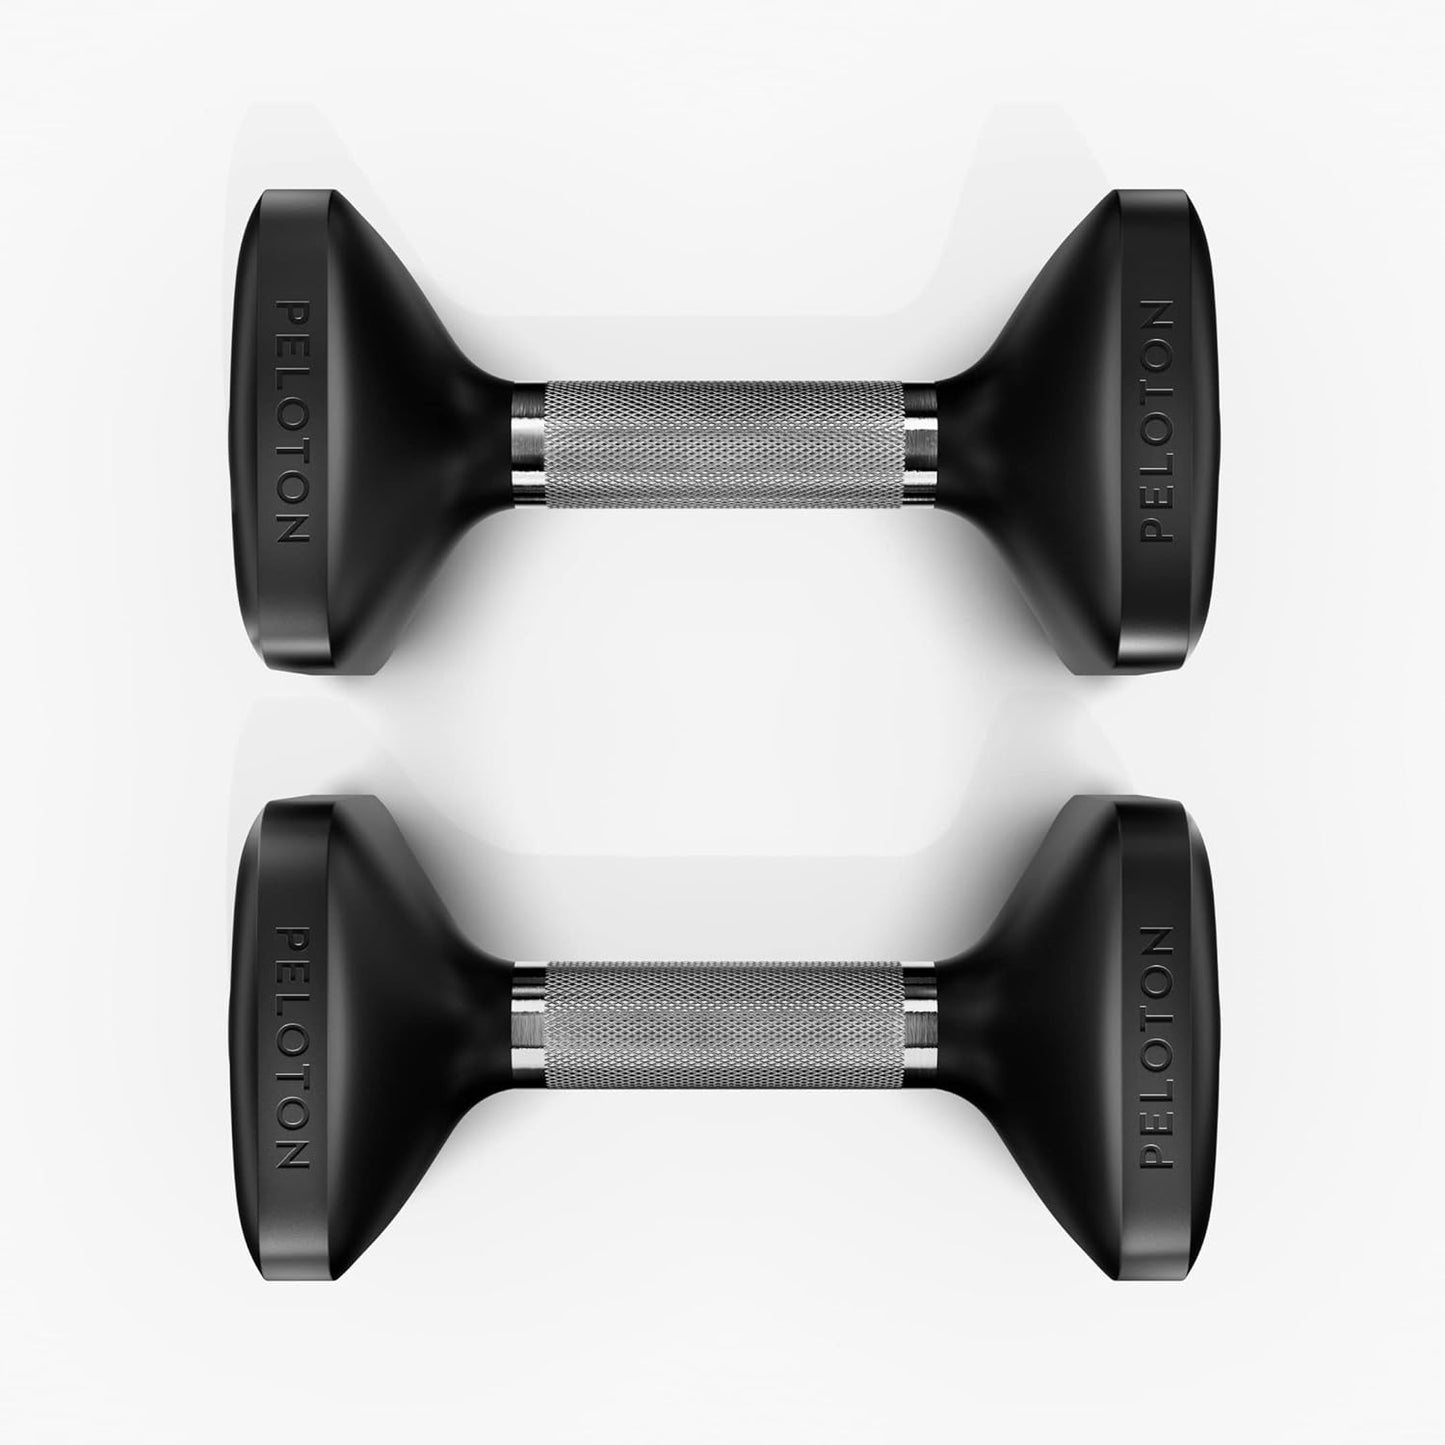 Peloton Dumbbells | Ergonomically Designed Pair of Cast Iron Weights with Urethane Coating and Non-Slip Grip, Available in Set of Two